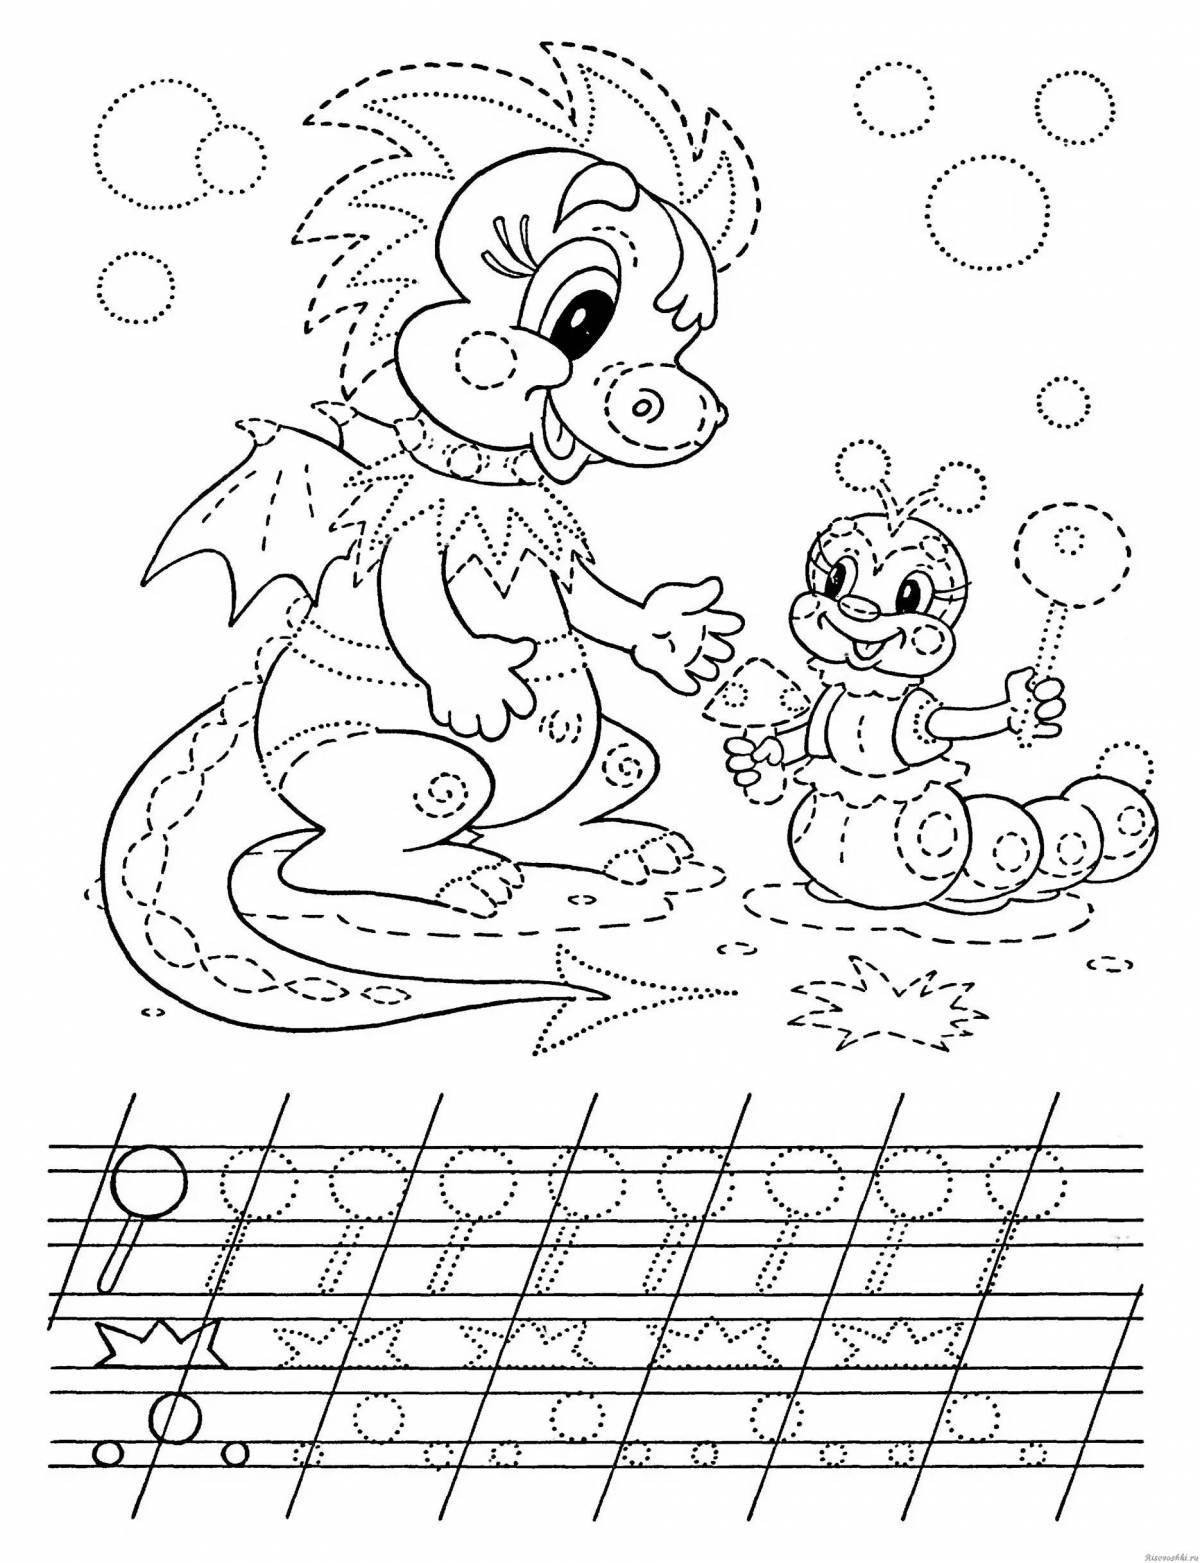 Bright educational coloring for girls 5-6 years old